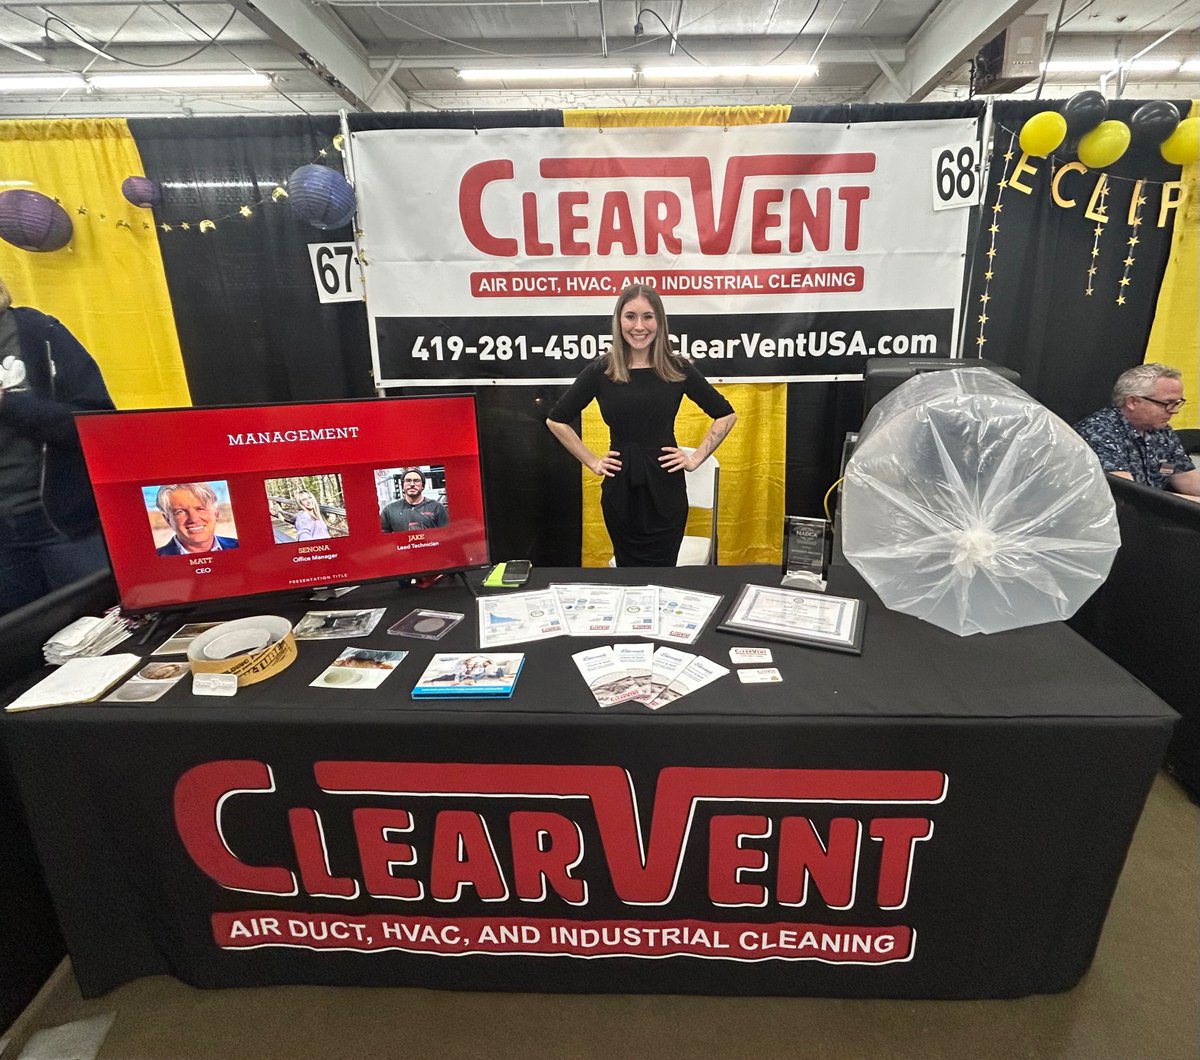 ClearVent made its way to the Richland BUSINESS EXPO last night! We got to show off our new partnerships Aeroseal and Duct Armor.#ductcleaning #aeroseal #clearventusa